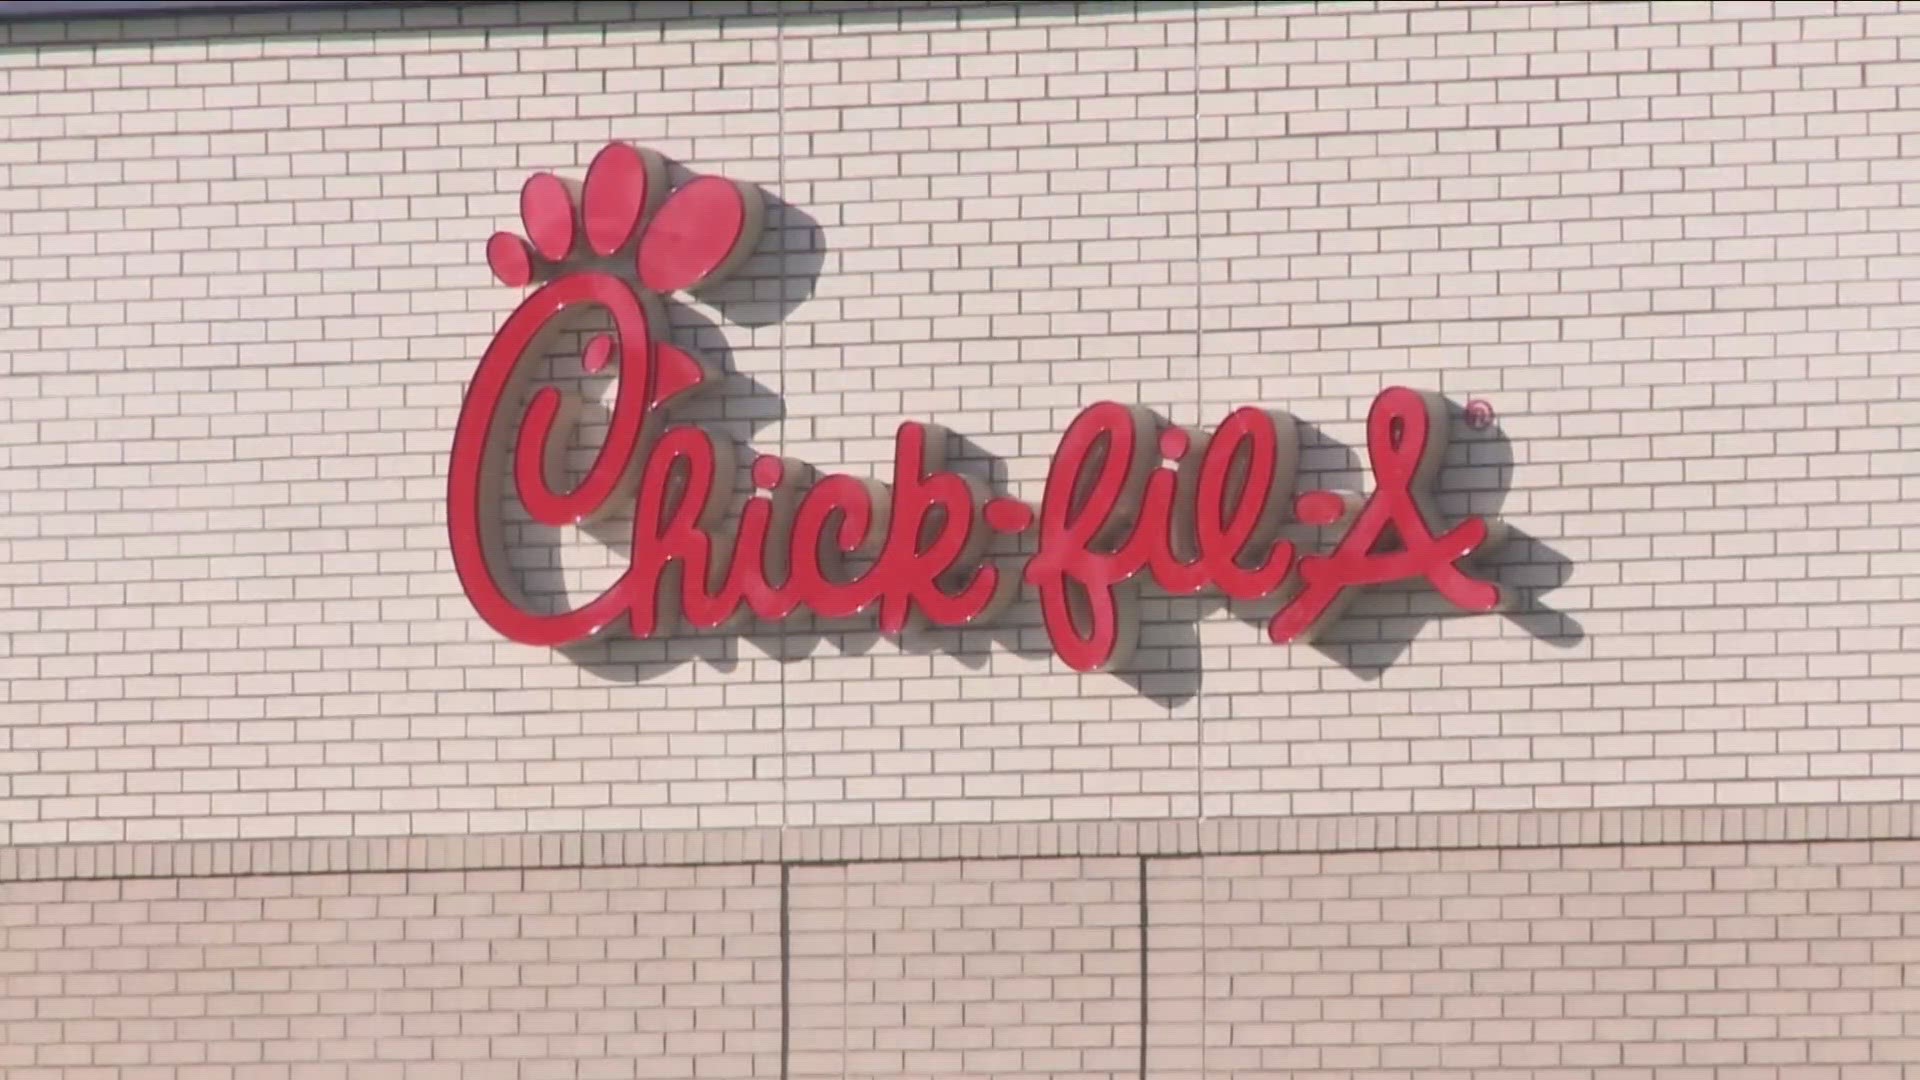 This isn't the first time Chick-fil-A has been the center of a debate when it comes to travel locations in New York.